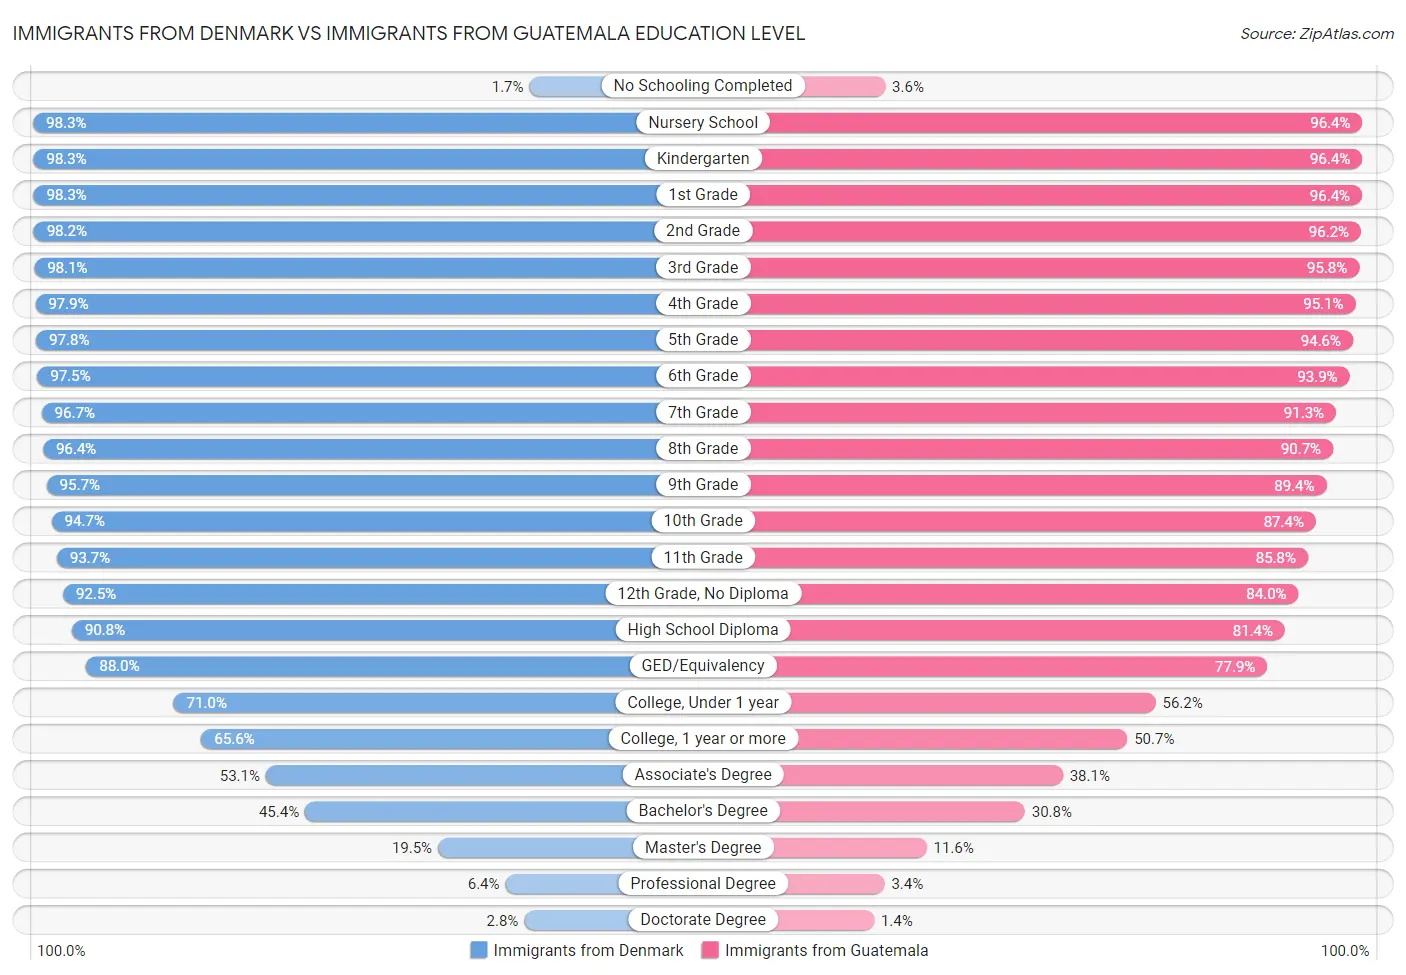 Immigrants from Denmark vs Immigrants from Guatemala Education Level